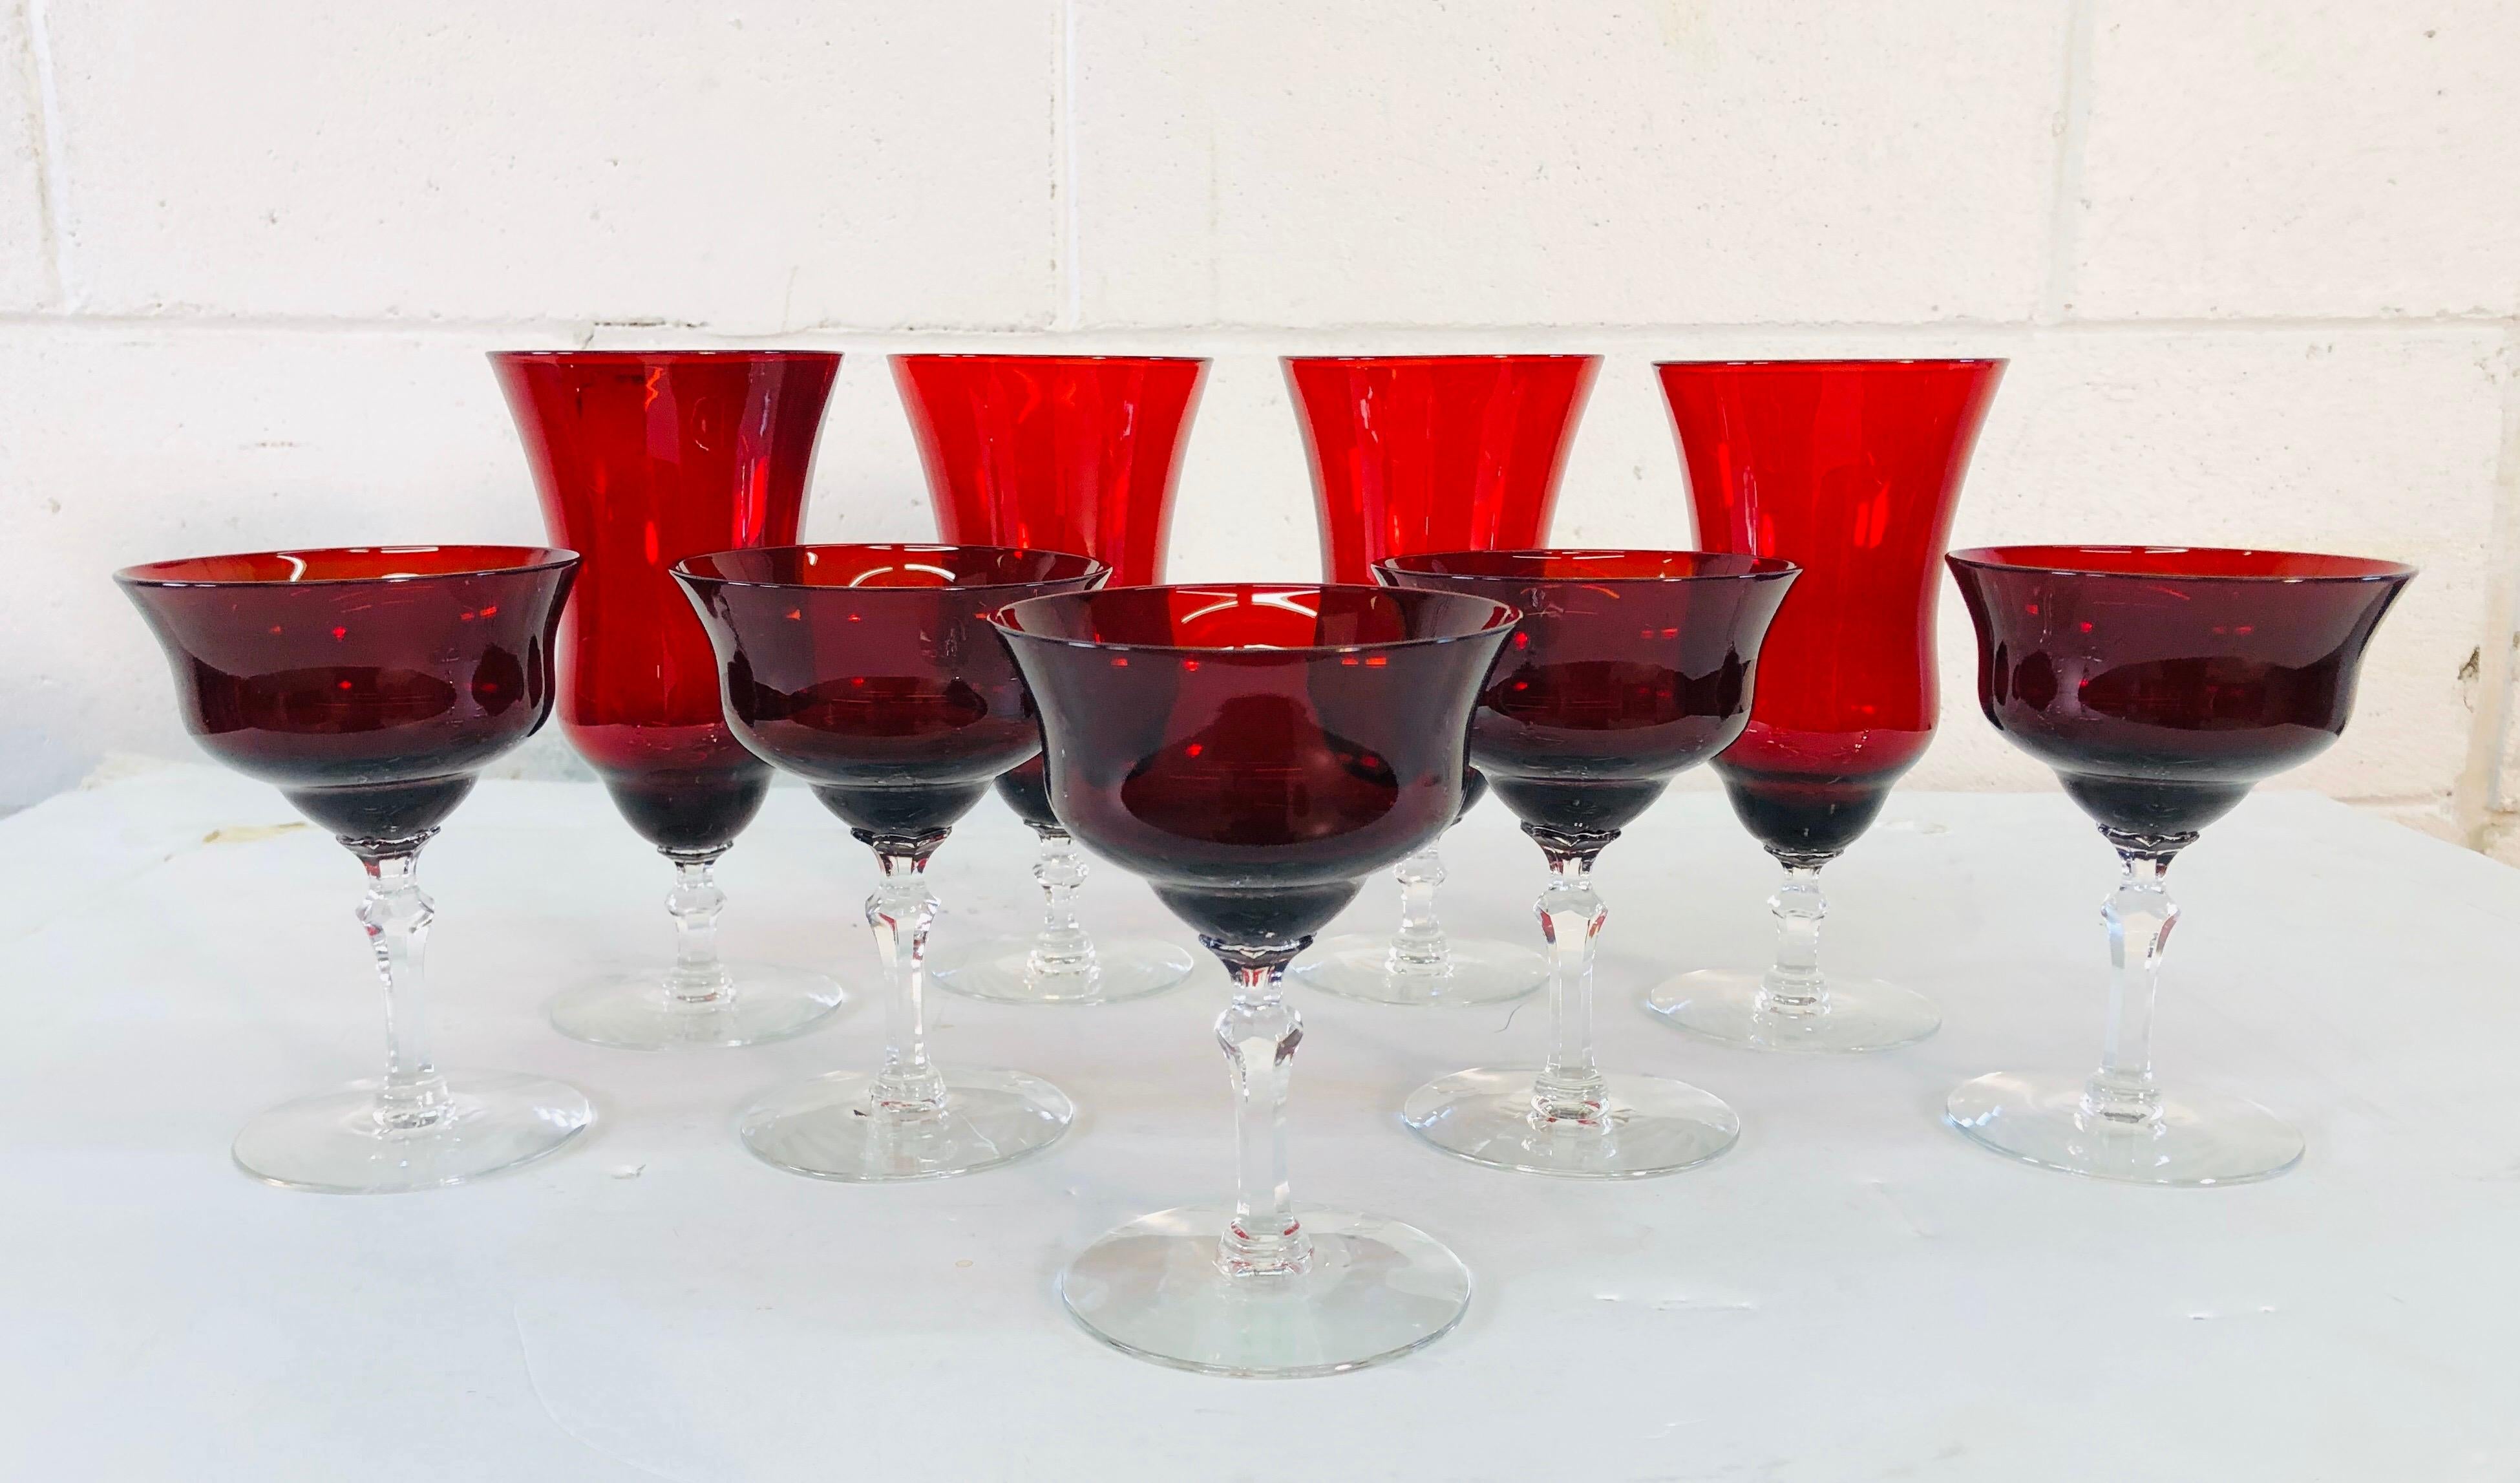 Art Deco set of 9 red glass stems with clear bases. There are 4 water/wine stems that measure 3.5”diameter x 7.75” height. There are 5 coupe stems that measure 3.75” diameter x 5” height. All are in excellent condition. No marks.